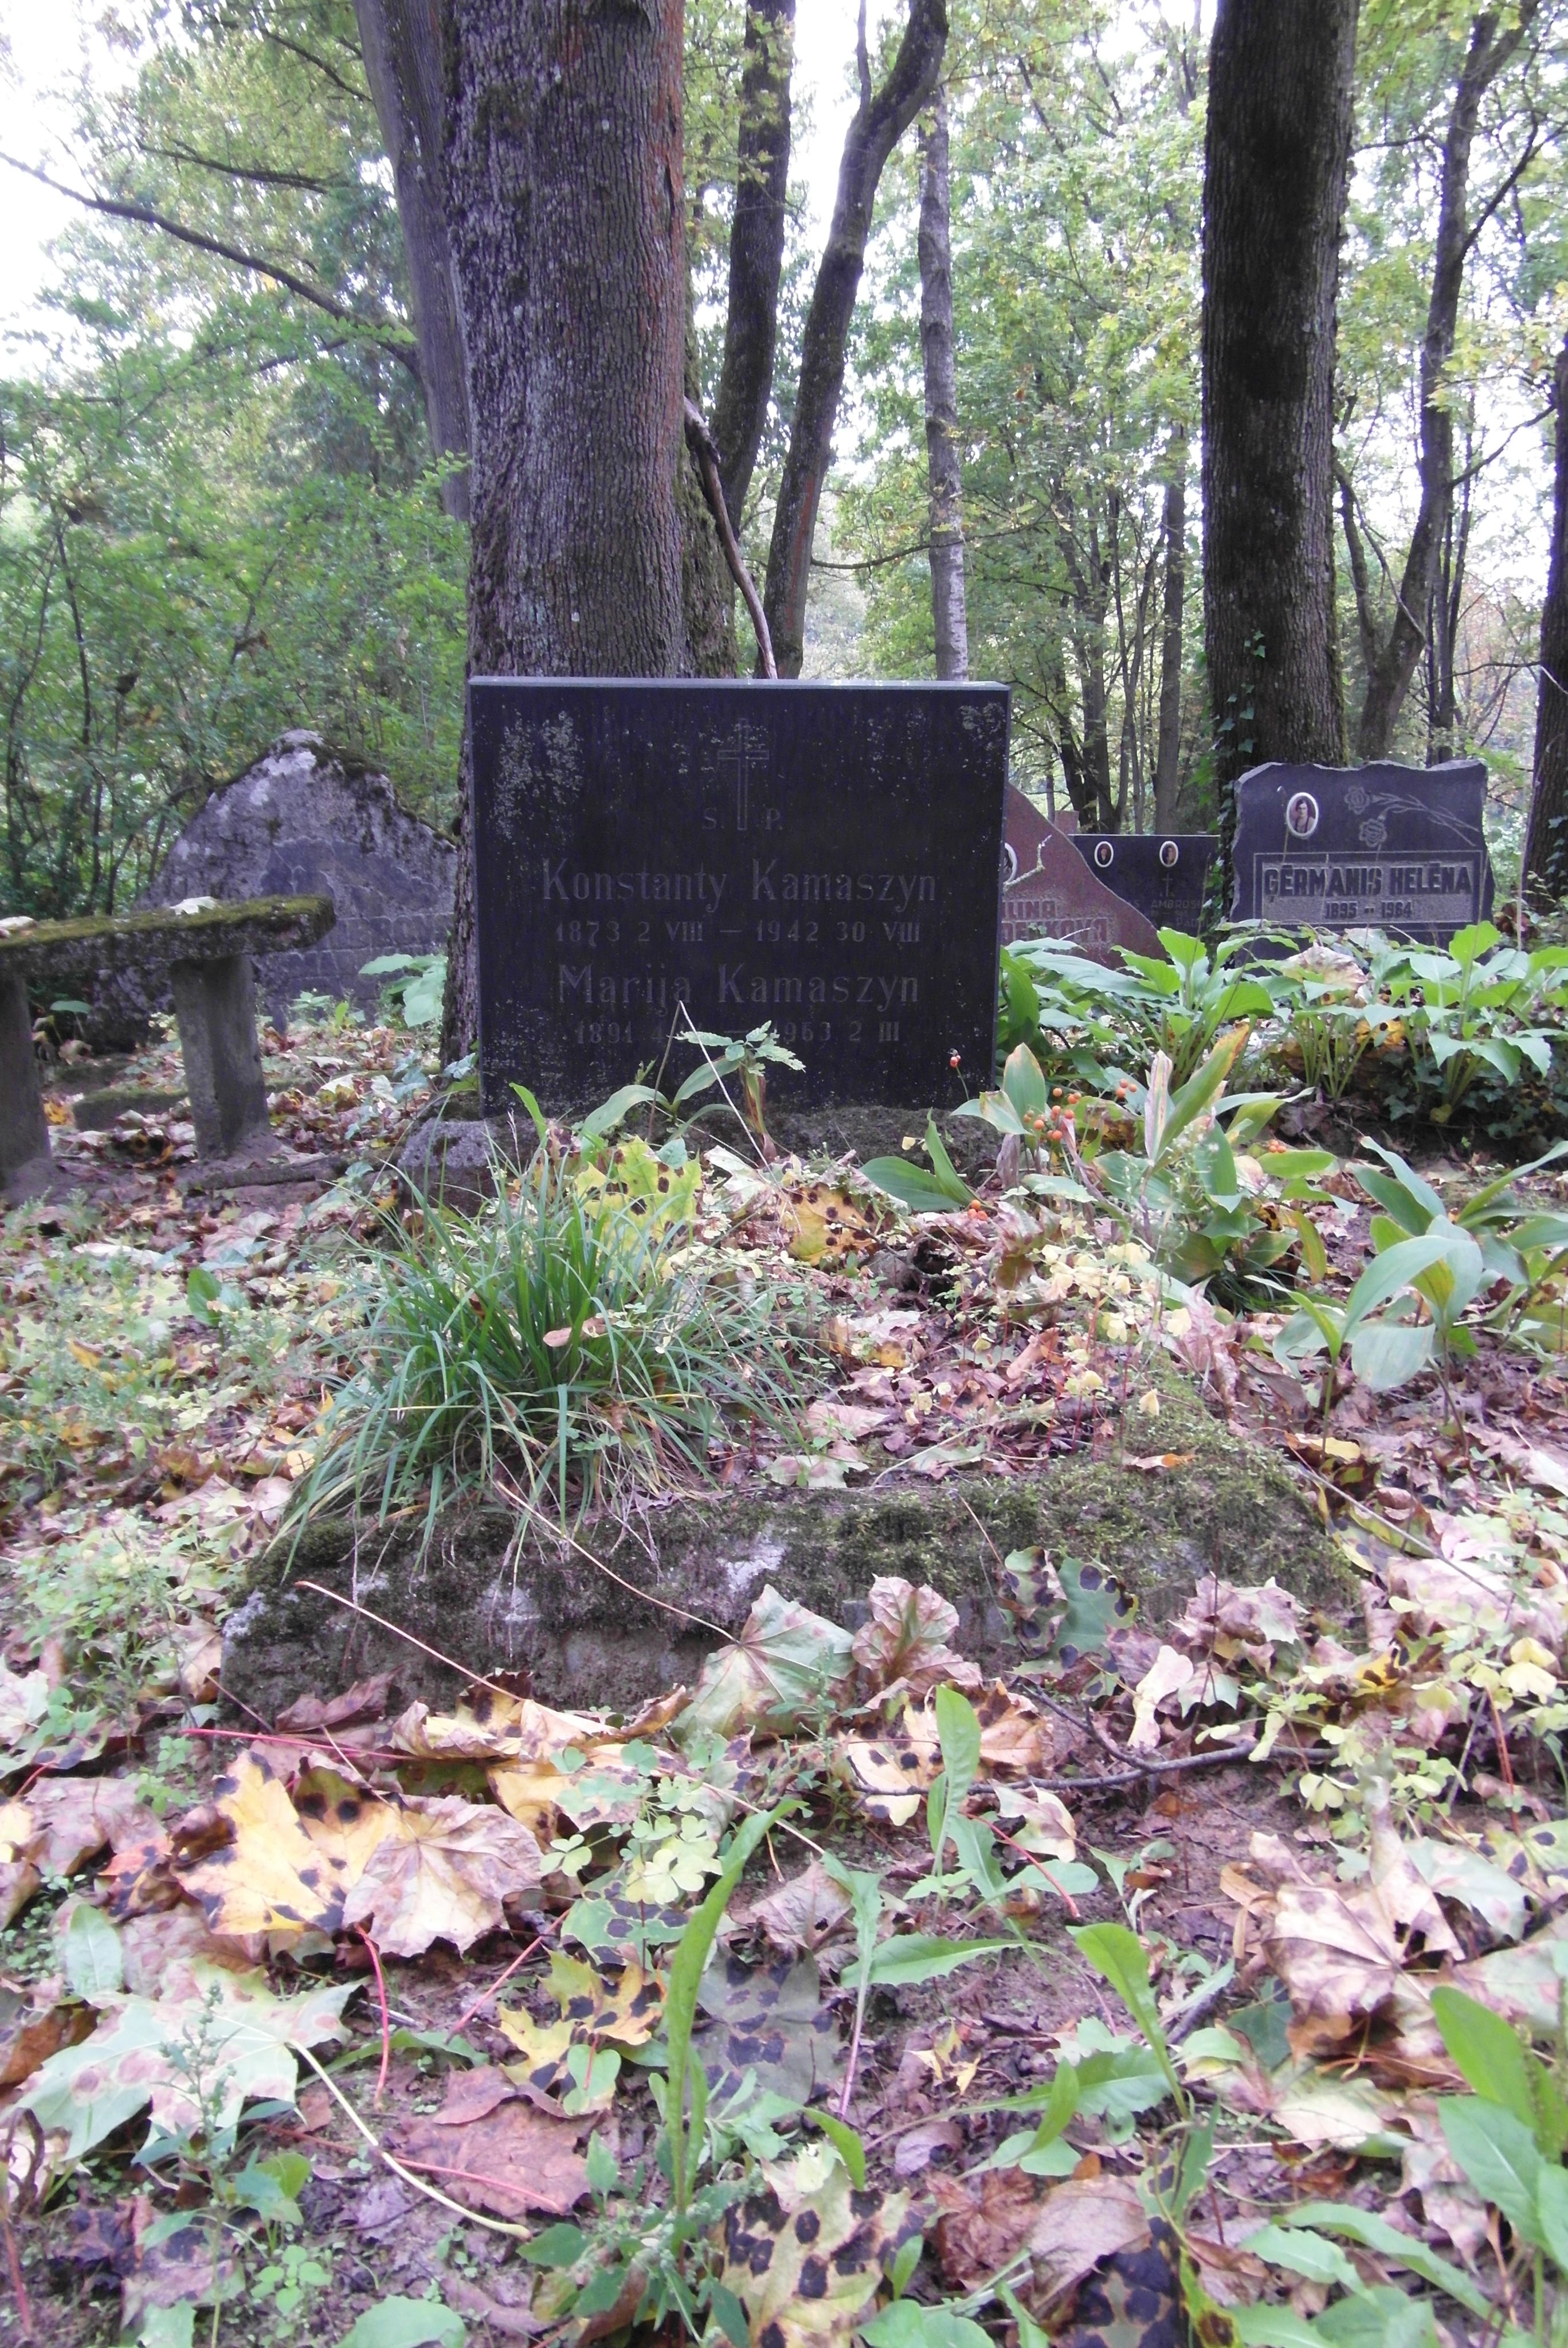 Tombstone of Konstantin and Maria Kamashin, St Michael's cemetery in Riga, as of 2021.